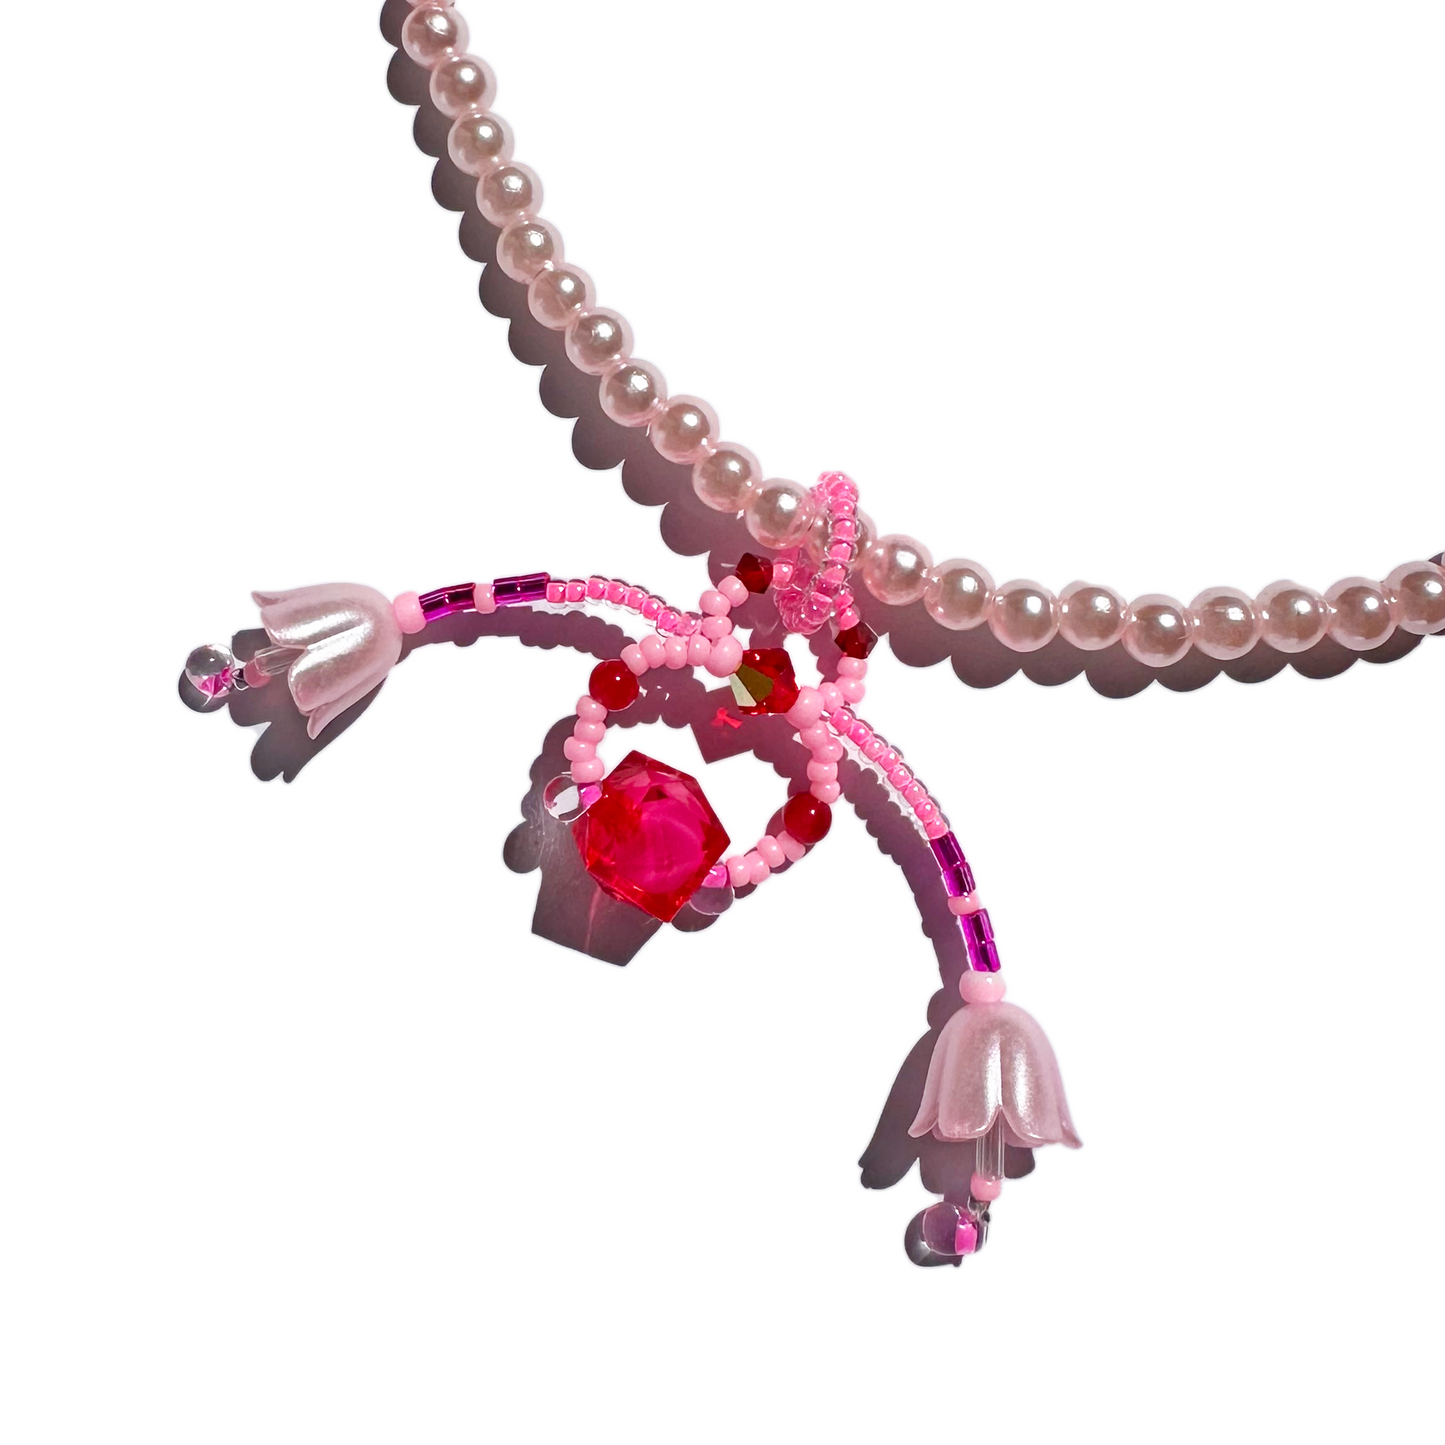 💗 Droopy Fuchsia Necklace